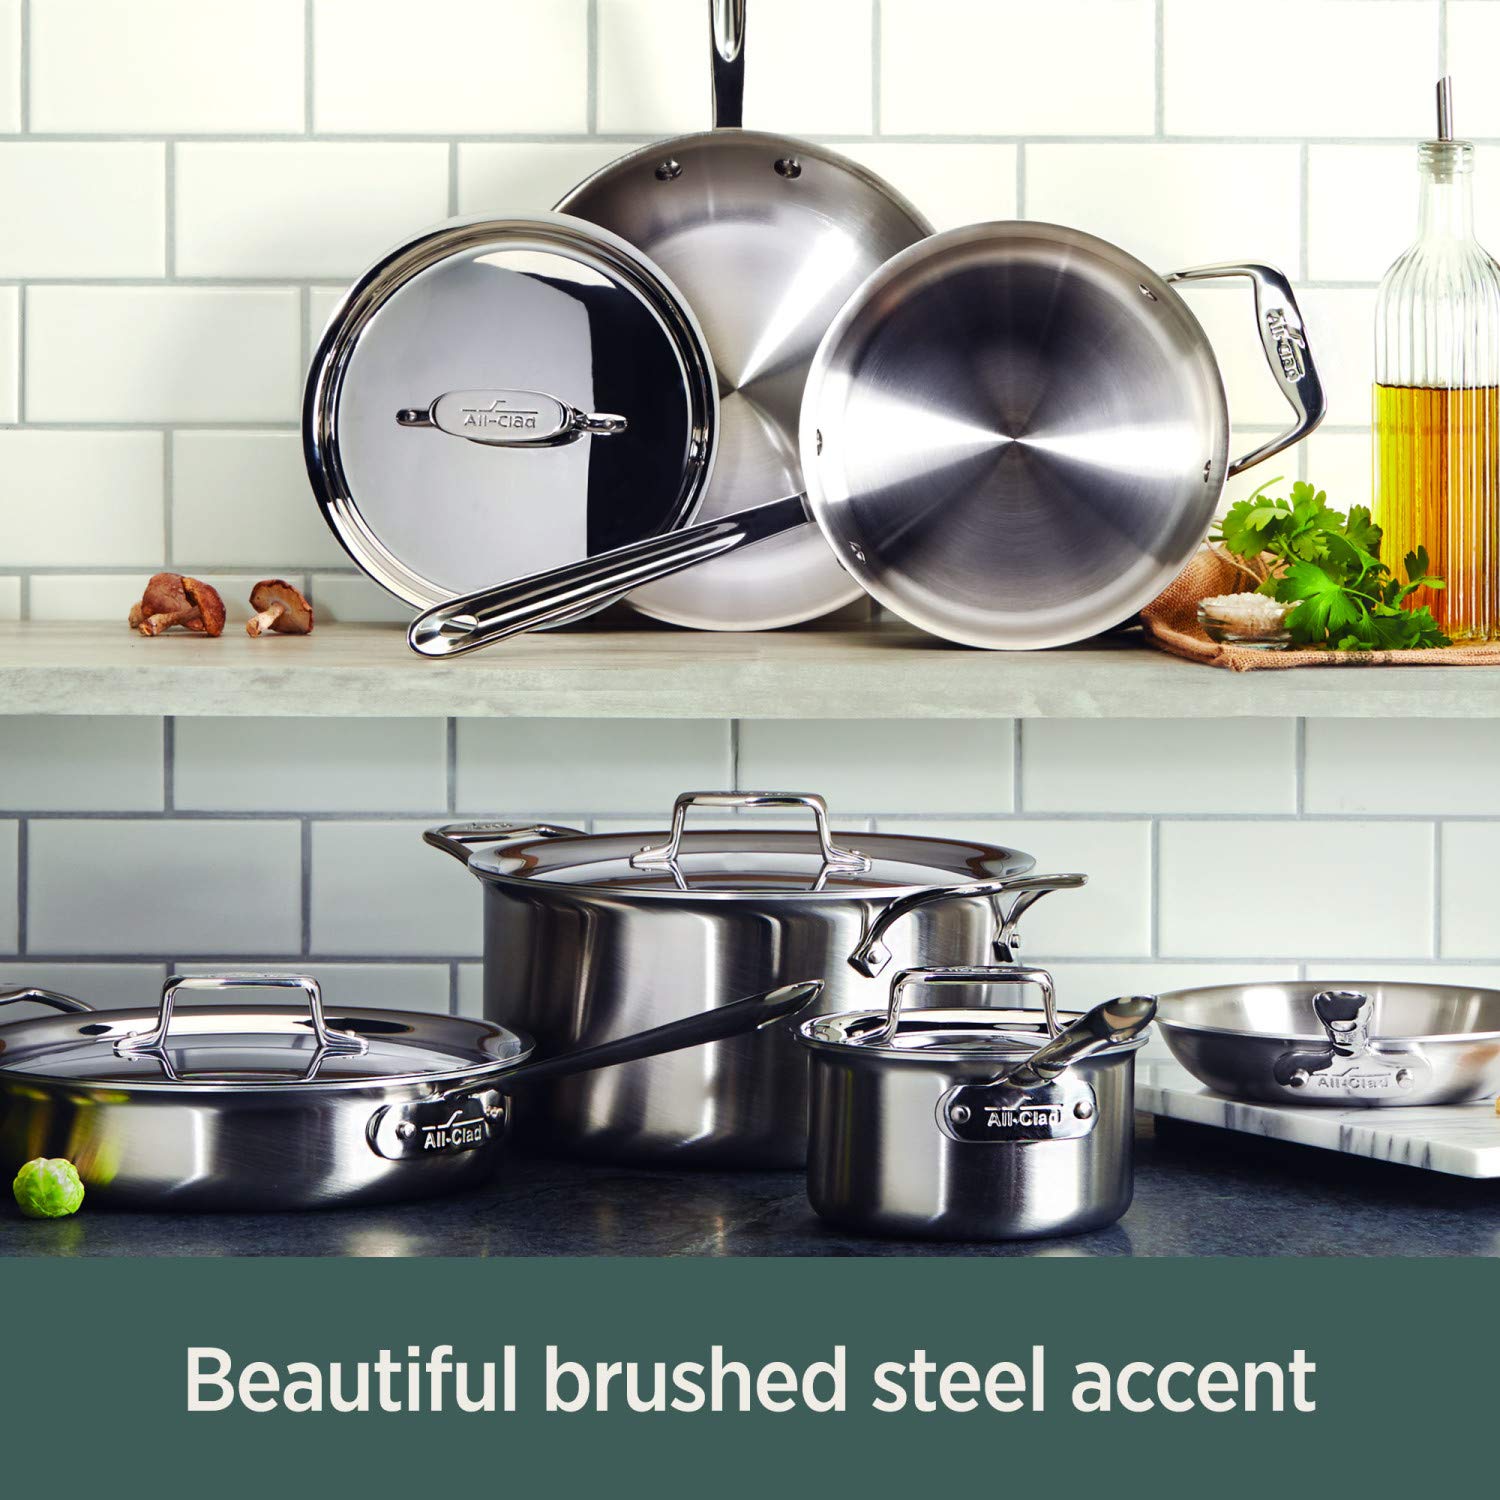 All-Clad D5 5-Ply Brushed Stainless Steel Cookware Set 14 Piece Induction Oven Broil Safe 600F Pots and Pans